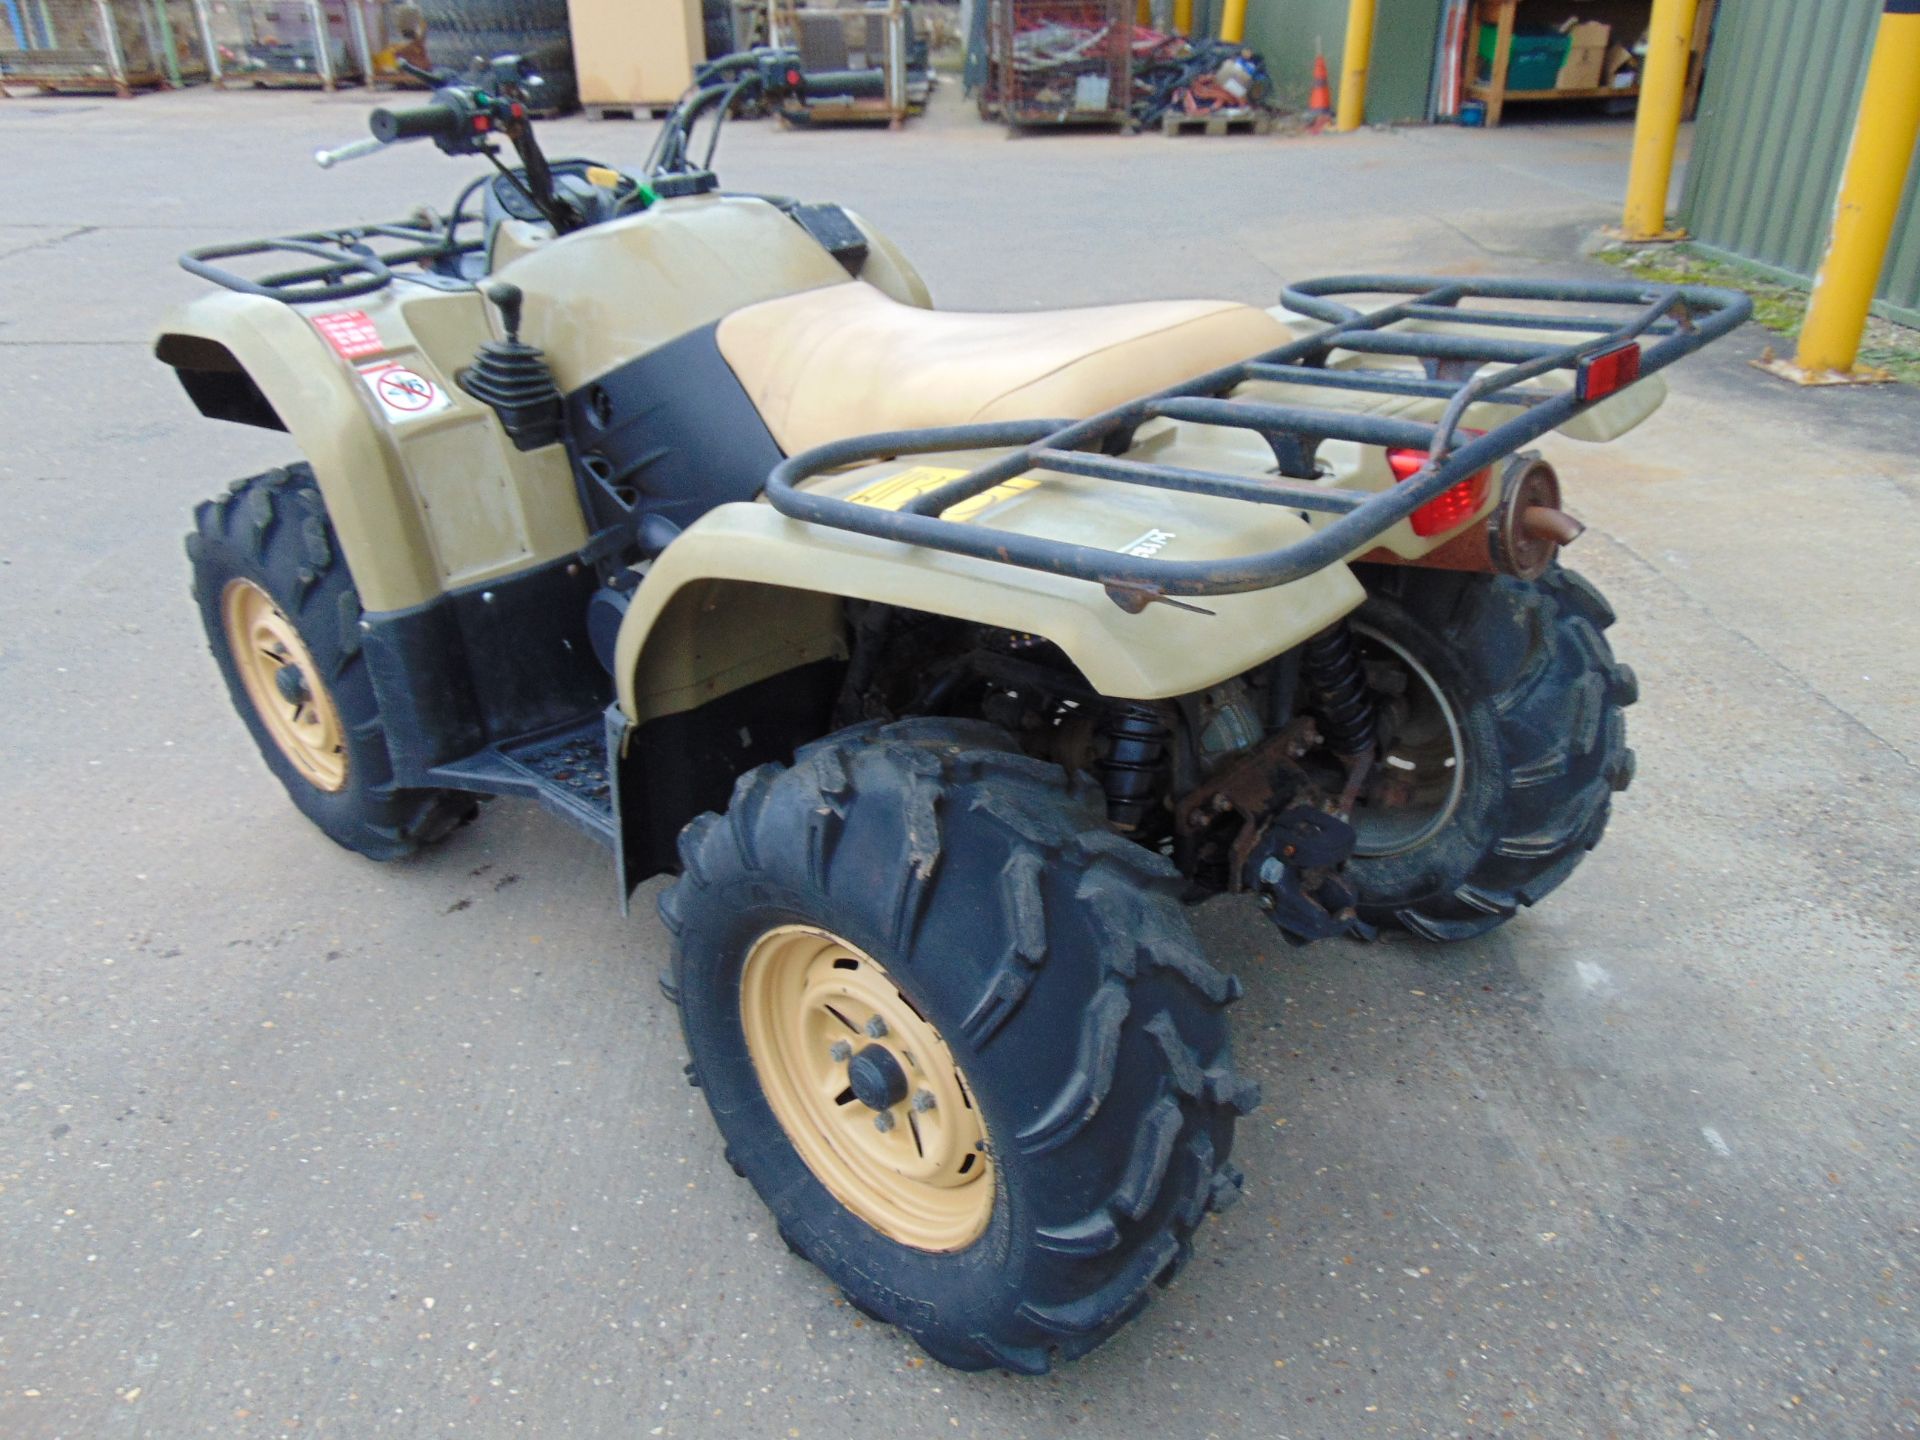 Recent Release Military Specification Yamaha Grizzly 450 4 x 4 ATV Quad Bike ONLY 59 HOURS!!! - Image 9 of 20